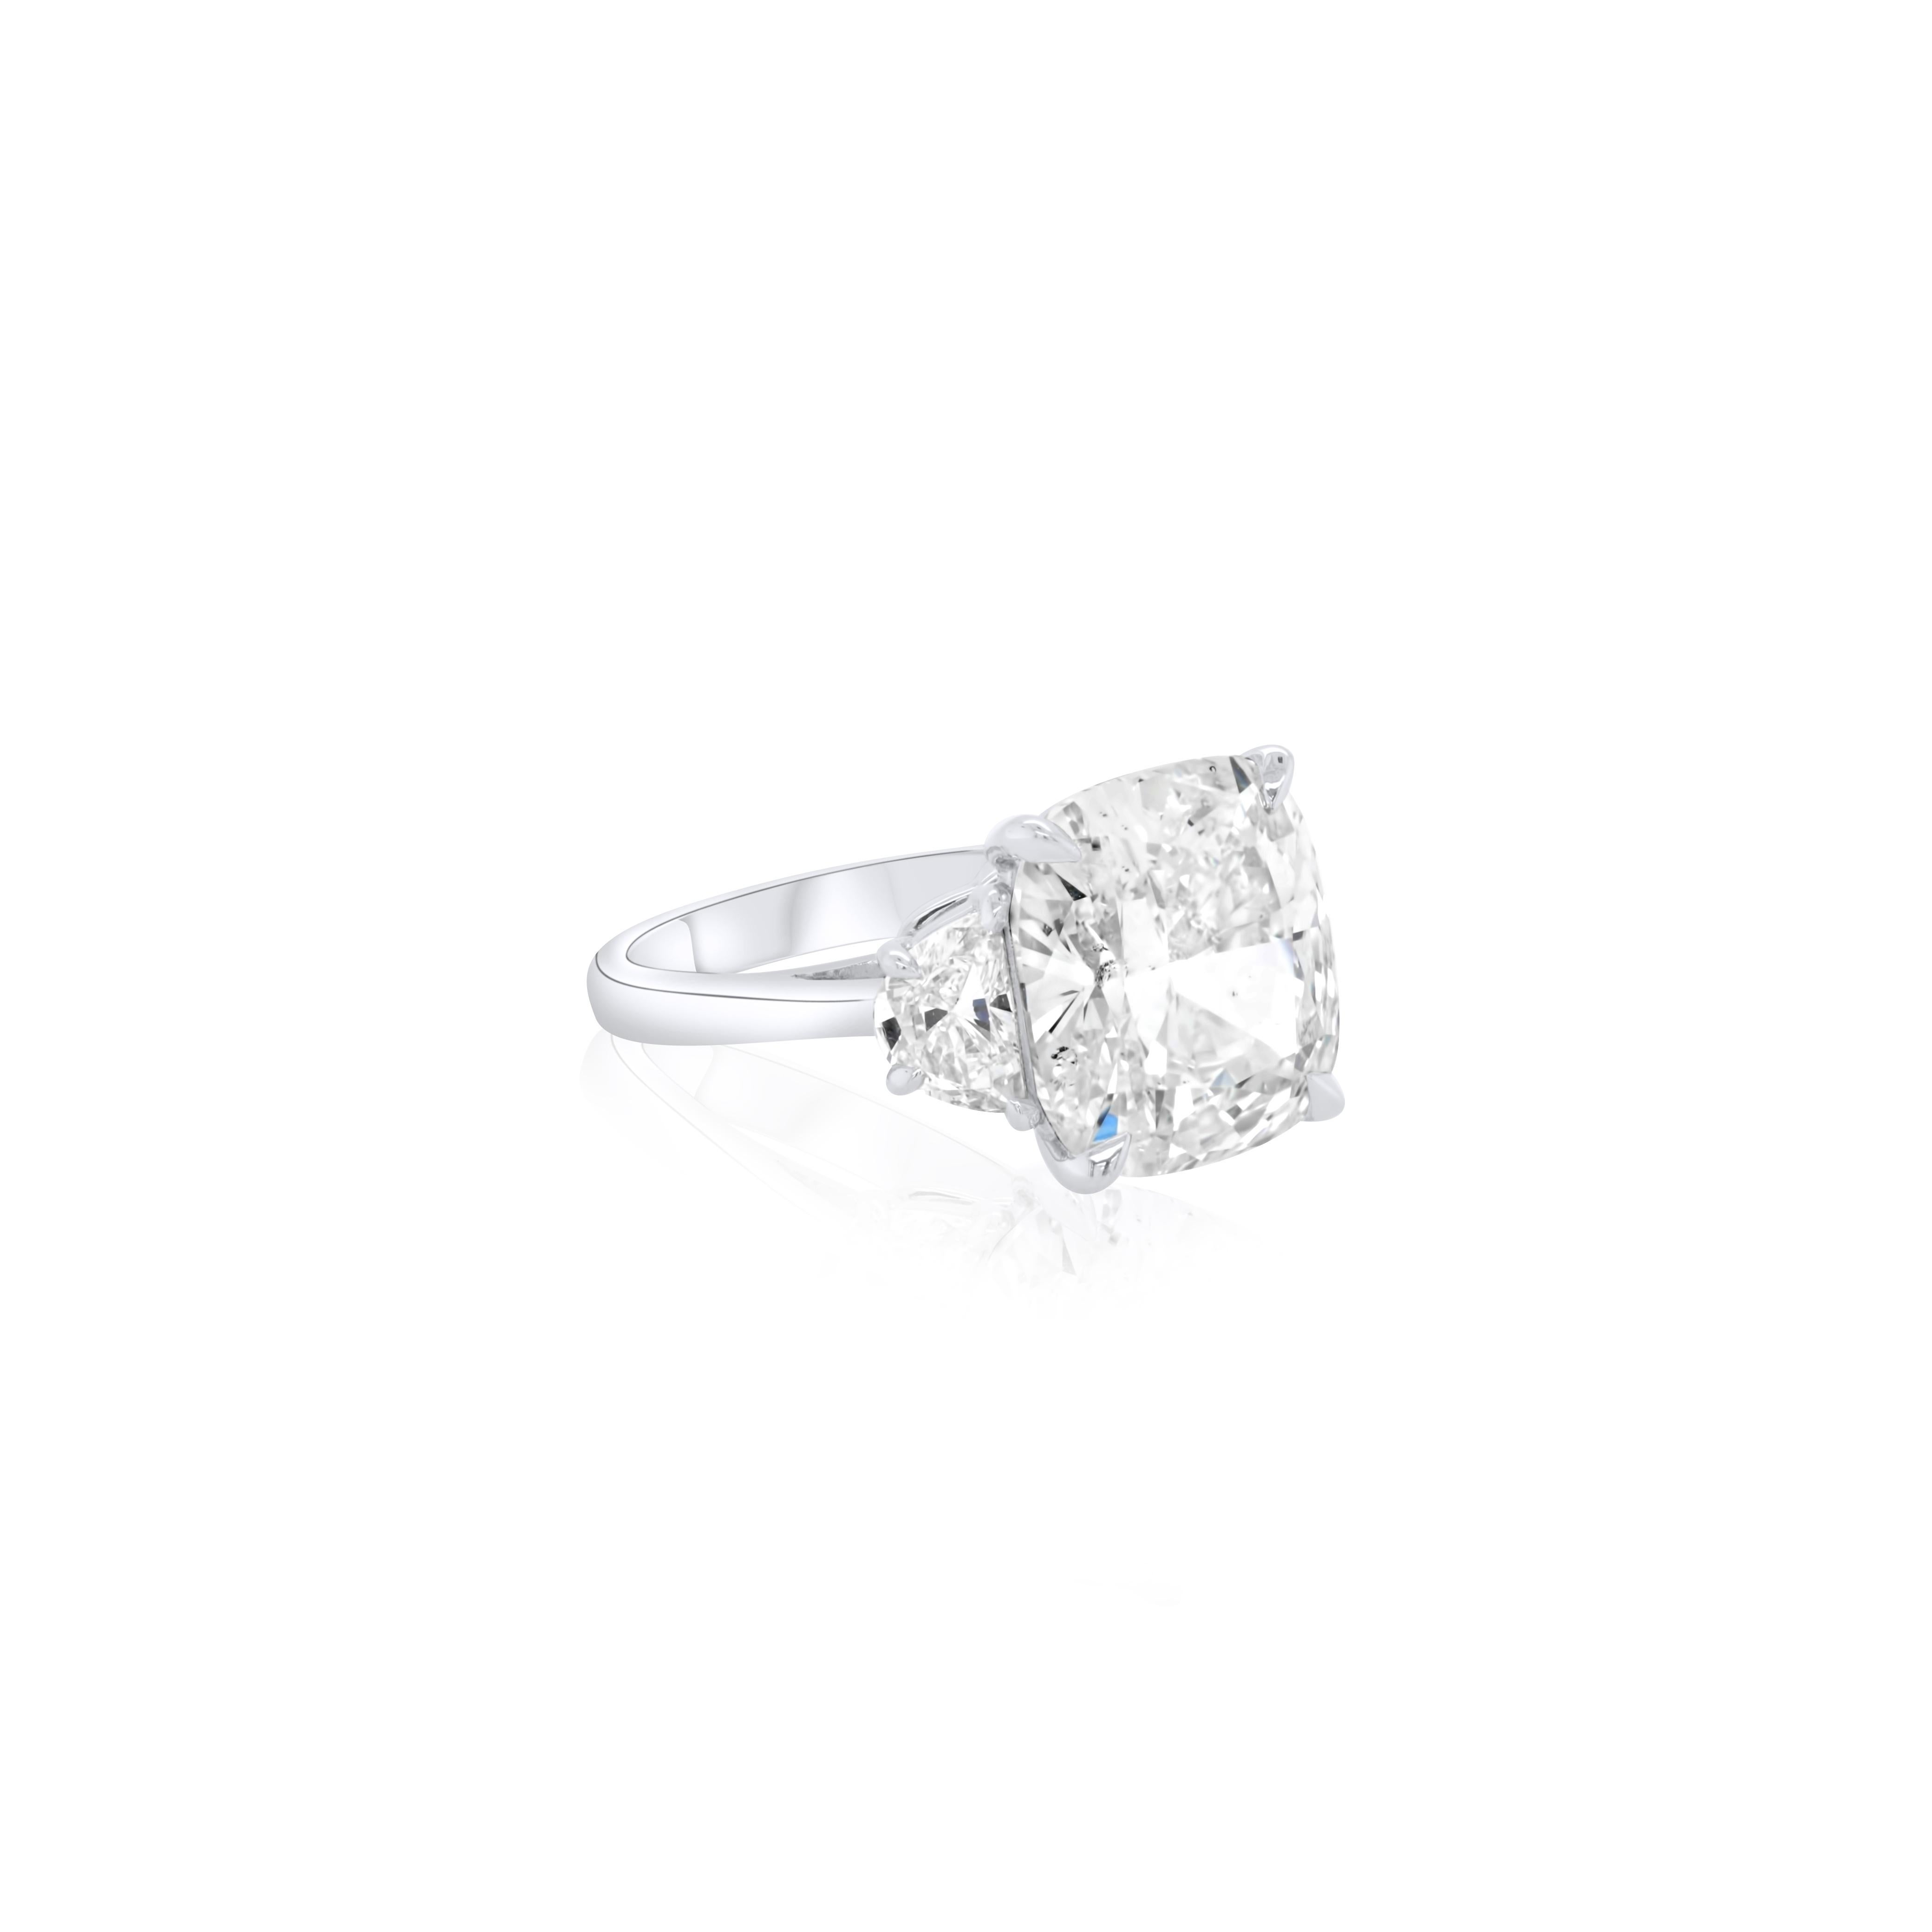 Platinum Three Stone Cushion Cut Diamond Ring, features 7.08 Carat Cushion Cut Diamond J Color SI2 in Clarity, set with two half moons with total diamond weight 1.01.
Certified by GIA  
